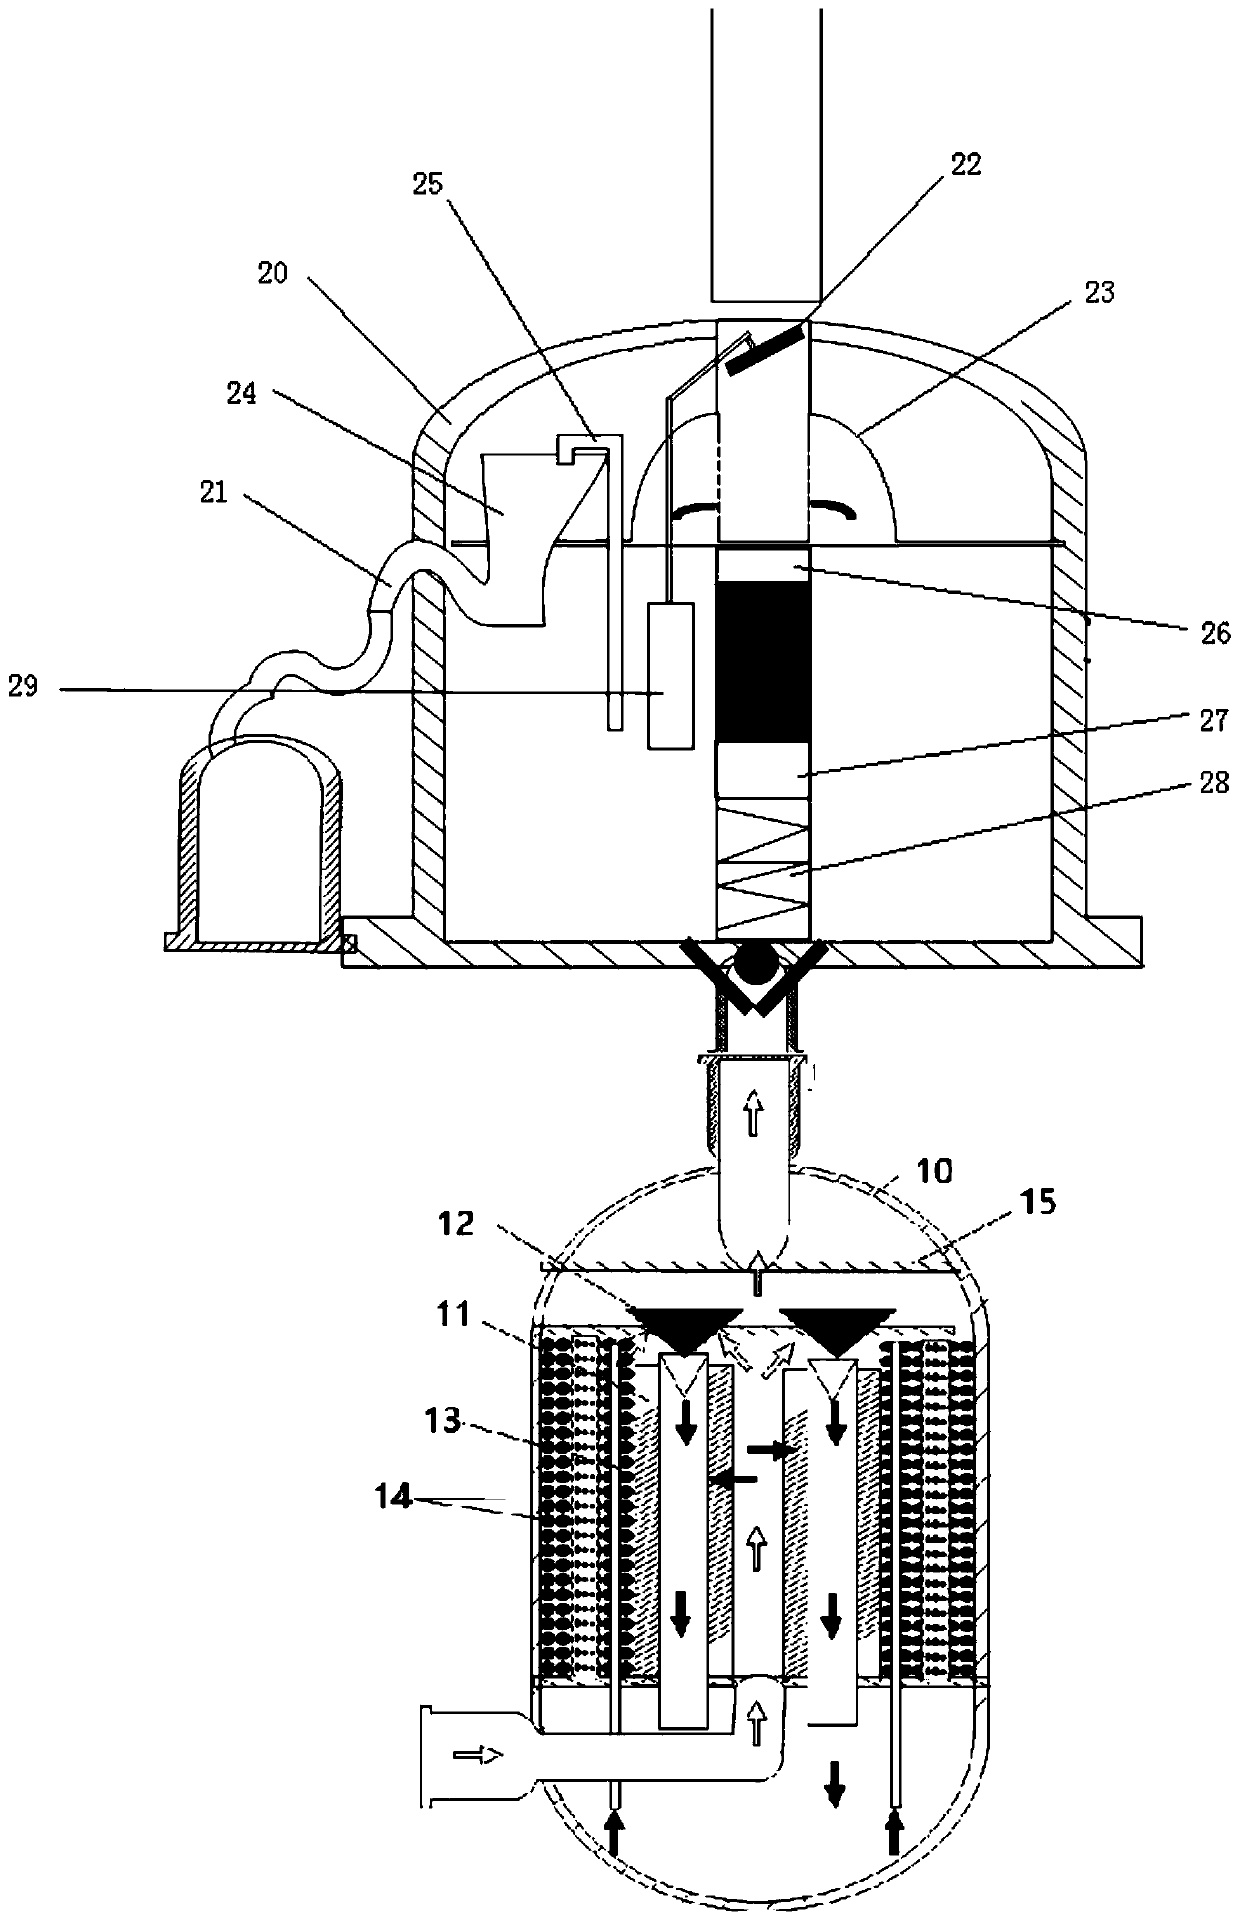 Water removal device for oil storage tank